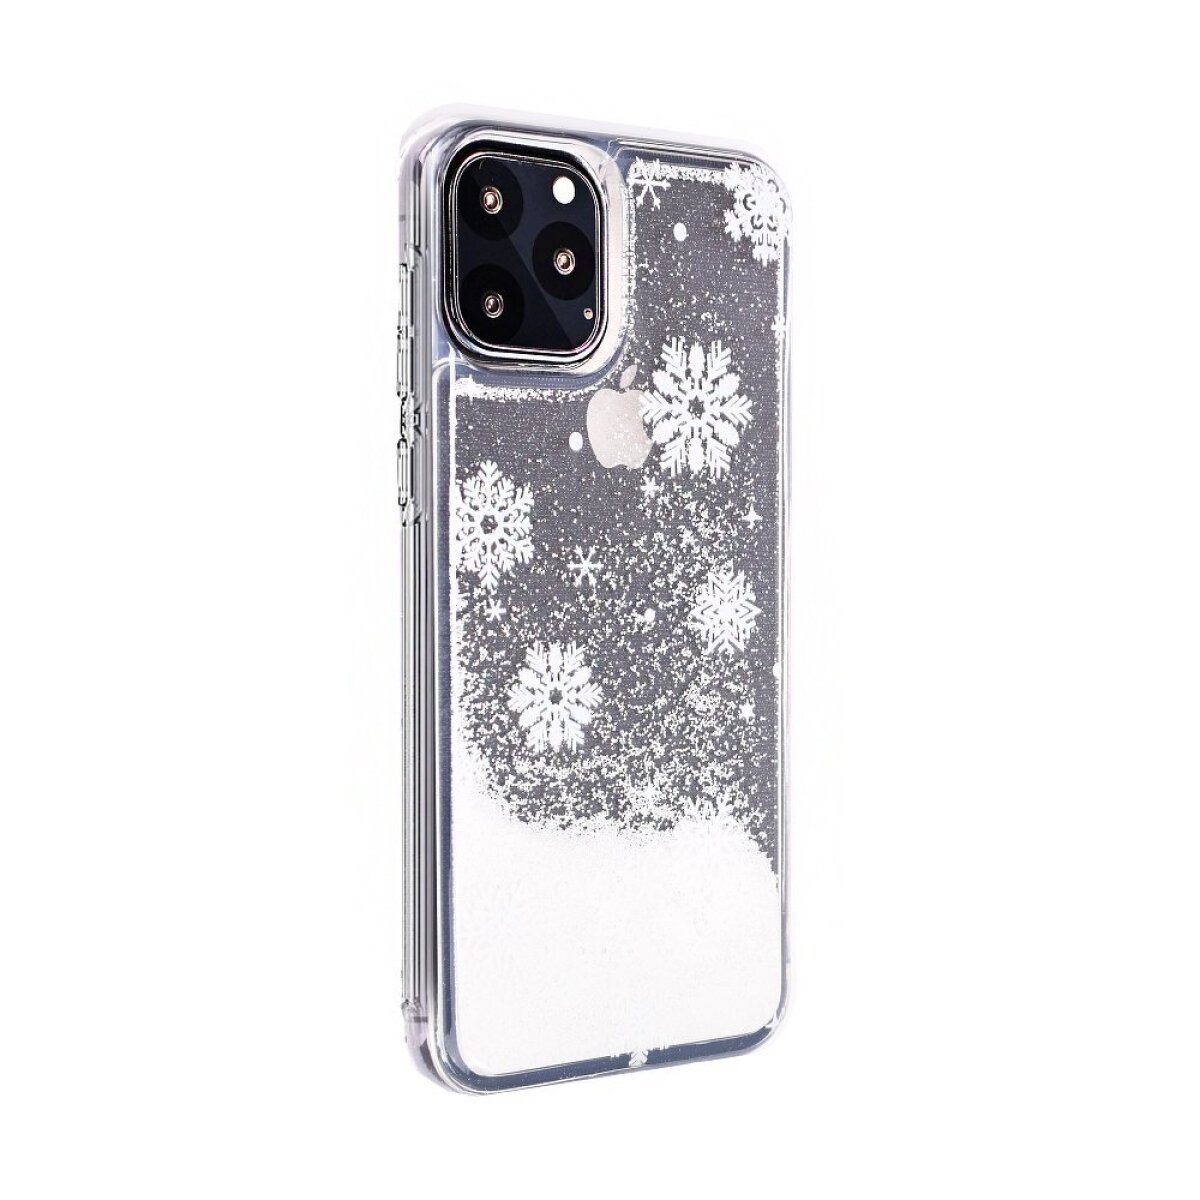 smart Winter 2019, 2019 snowflakes, P Full FORCELL Cover, Huawei, Smart Not available P